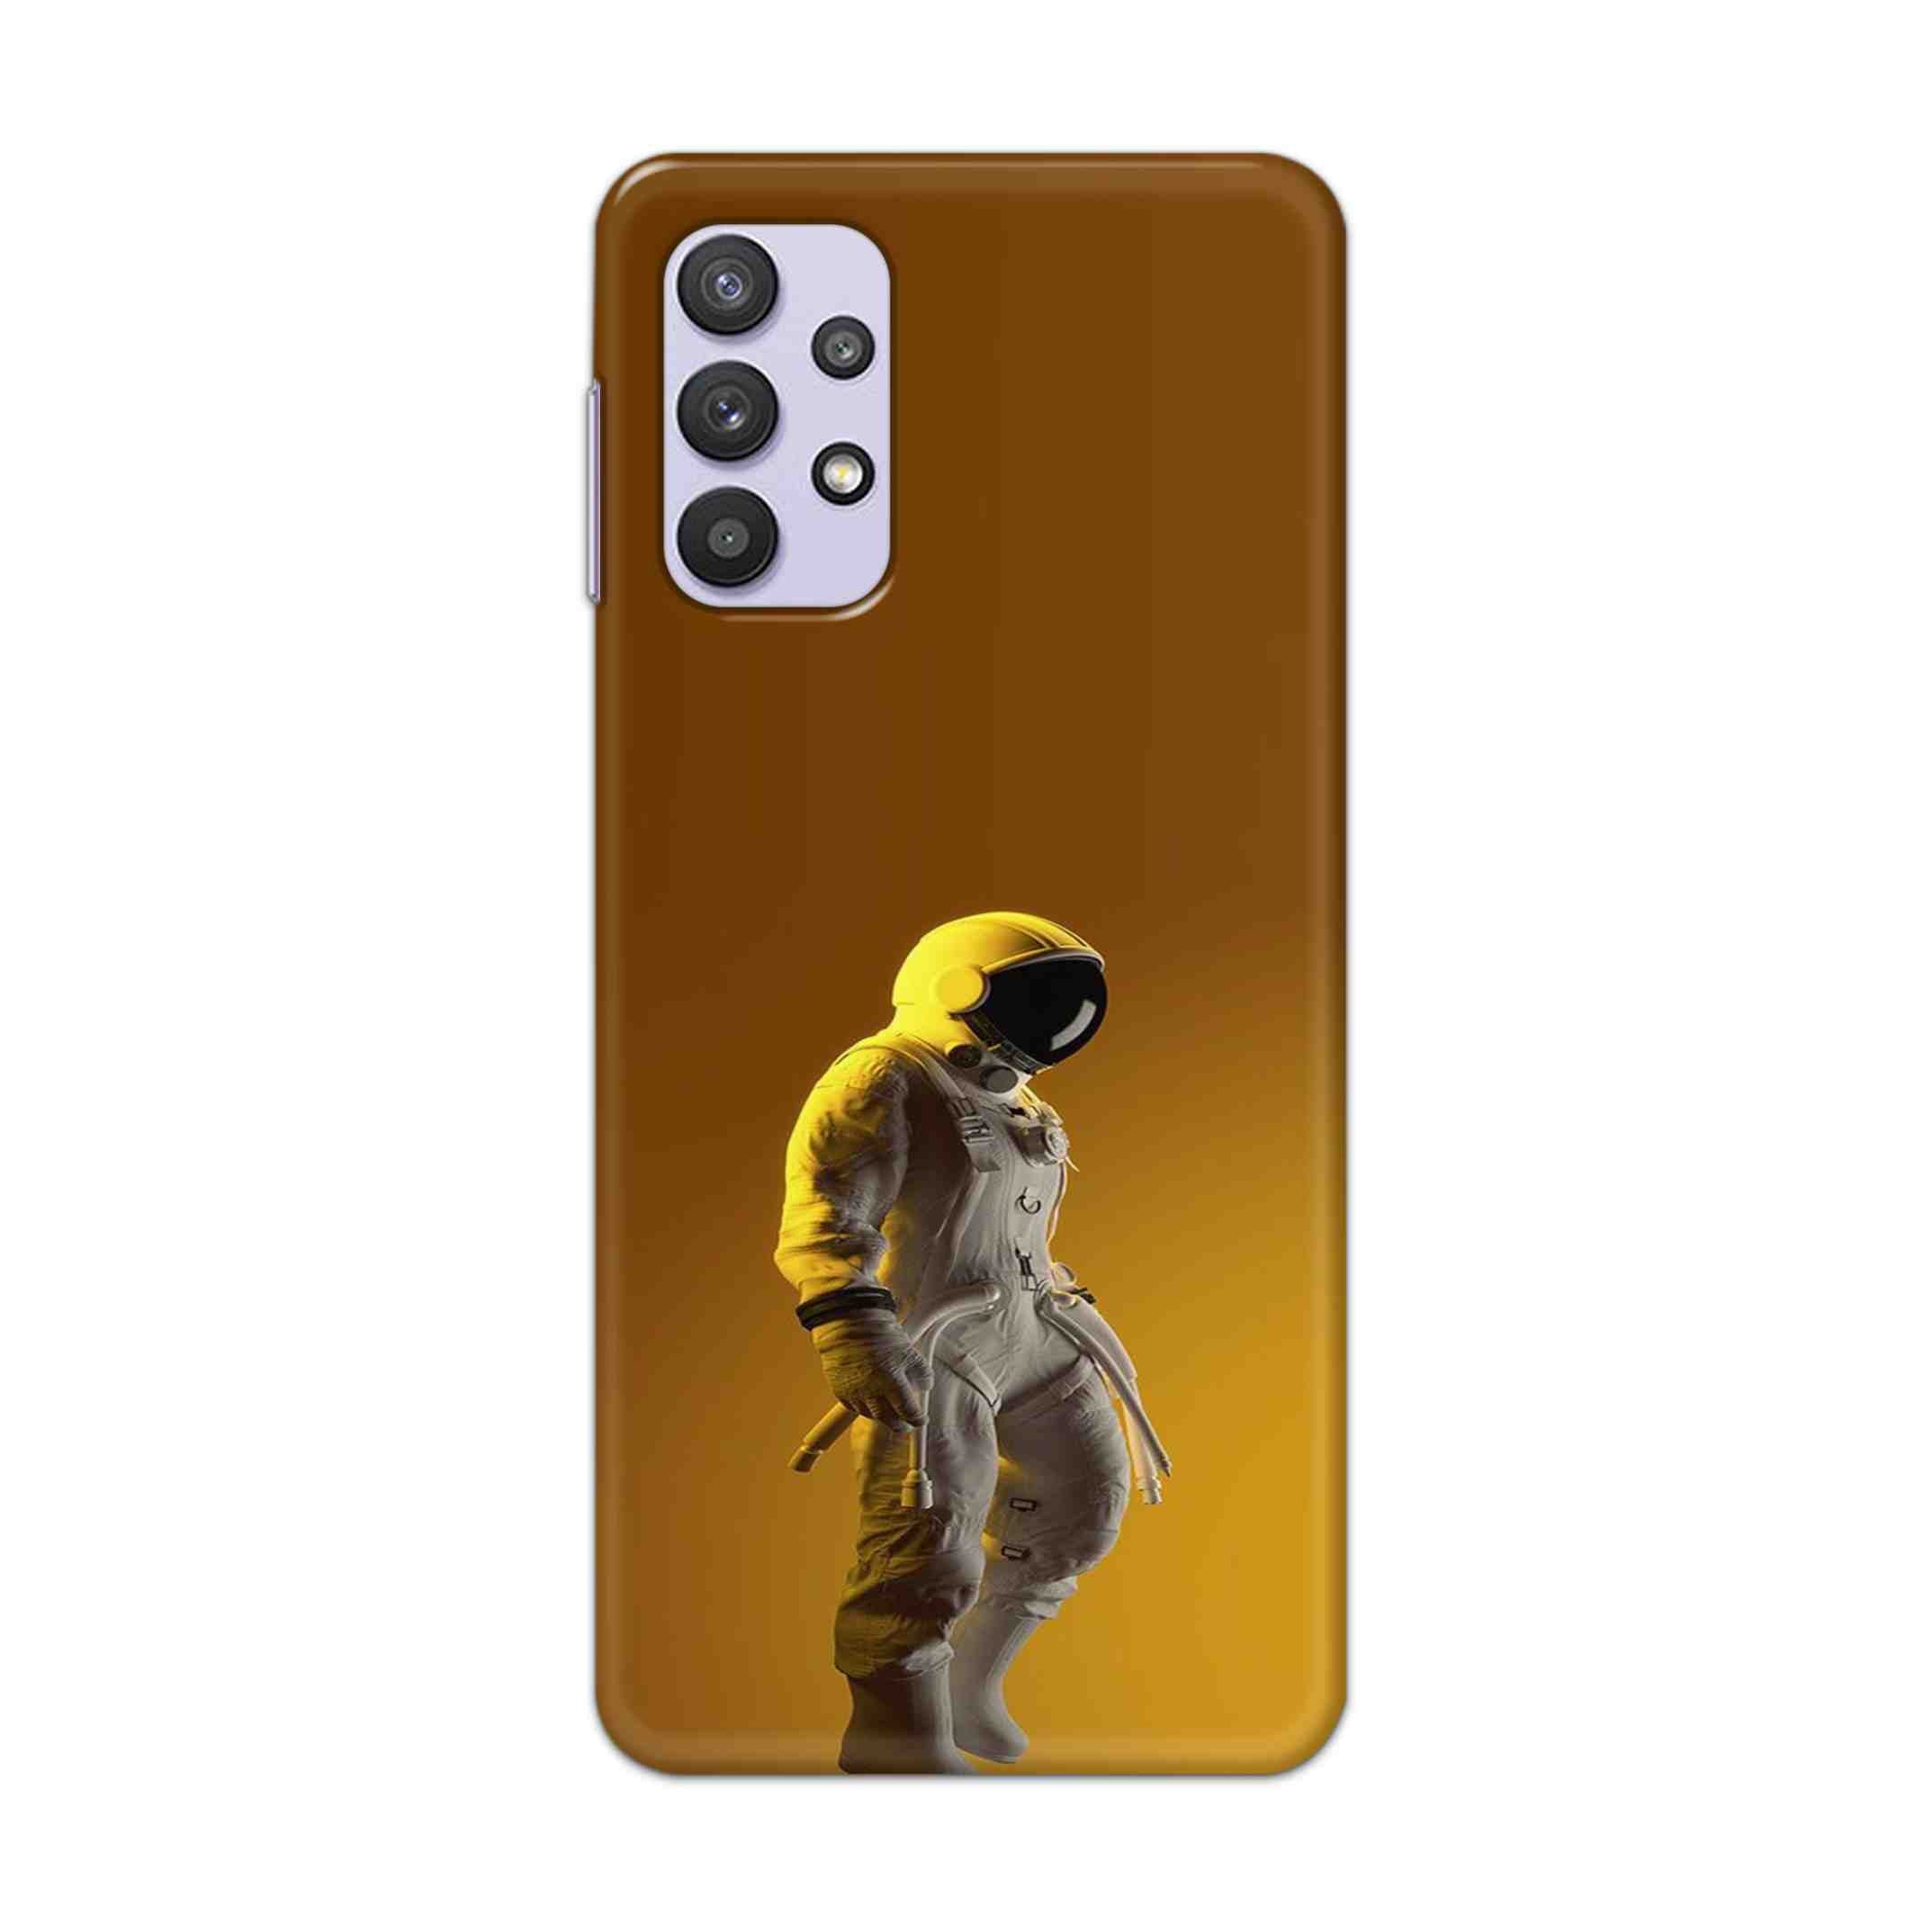 Buy Yellow Astronaut Hard Back Mobile Phone Case Cover For Samsung A32 4G Online